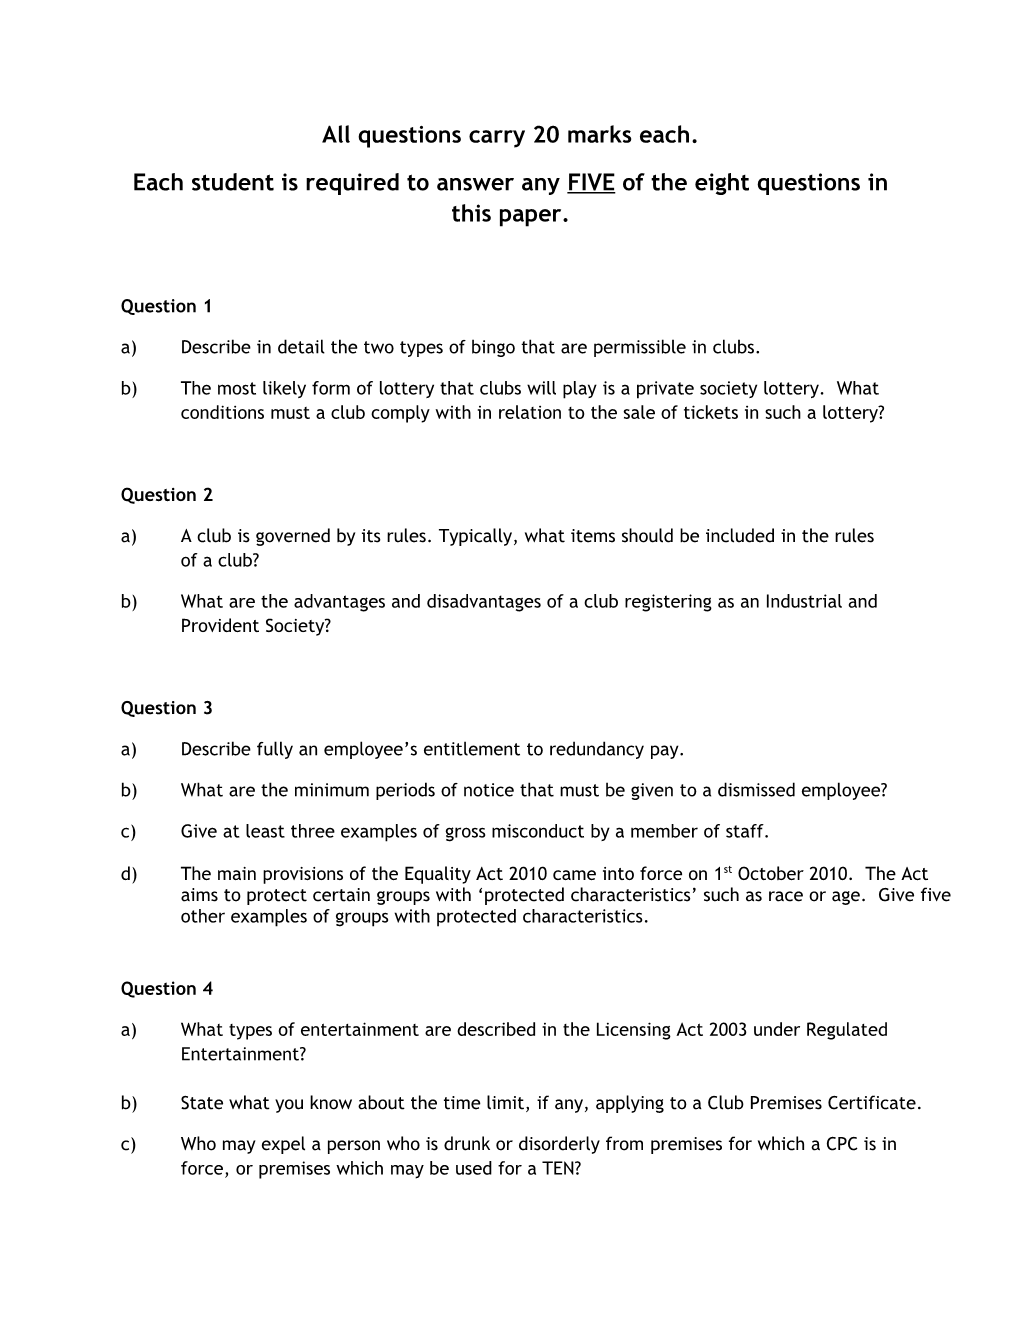 All Questions Carry 20 Marks Each